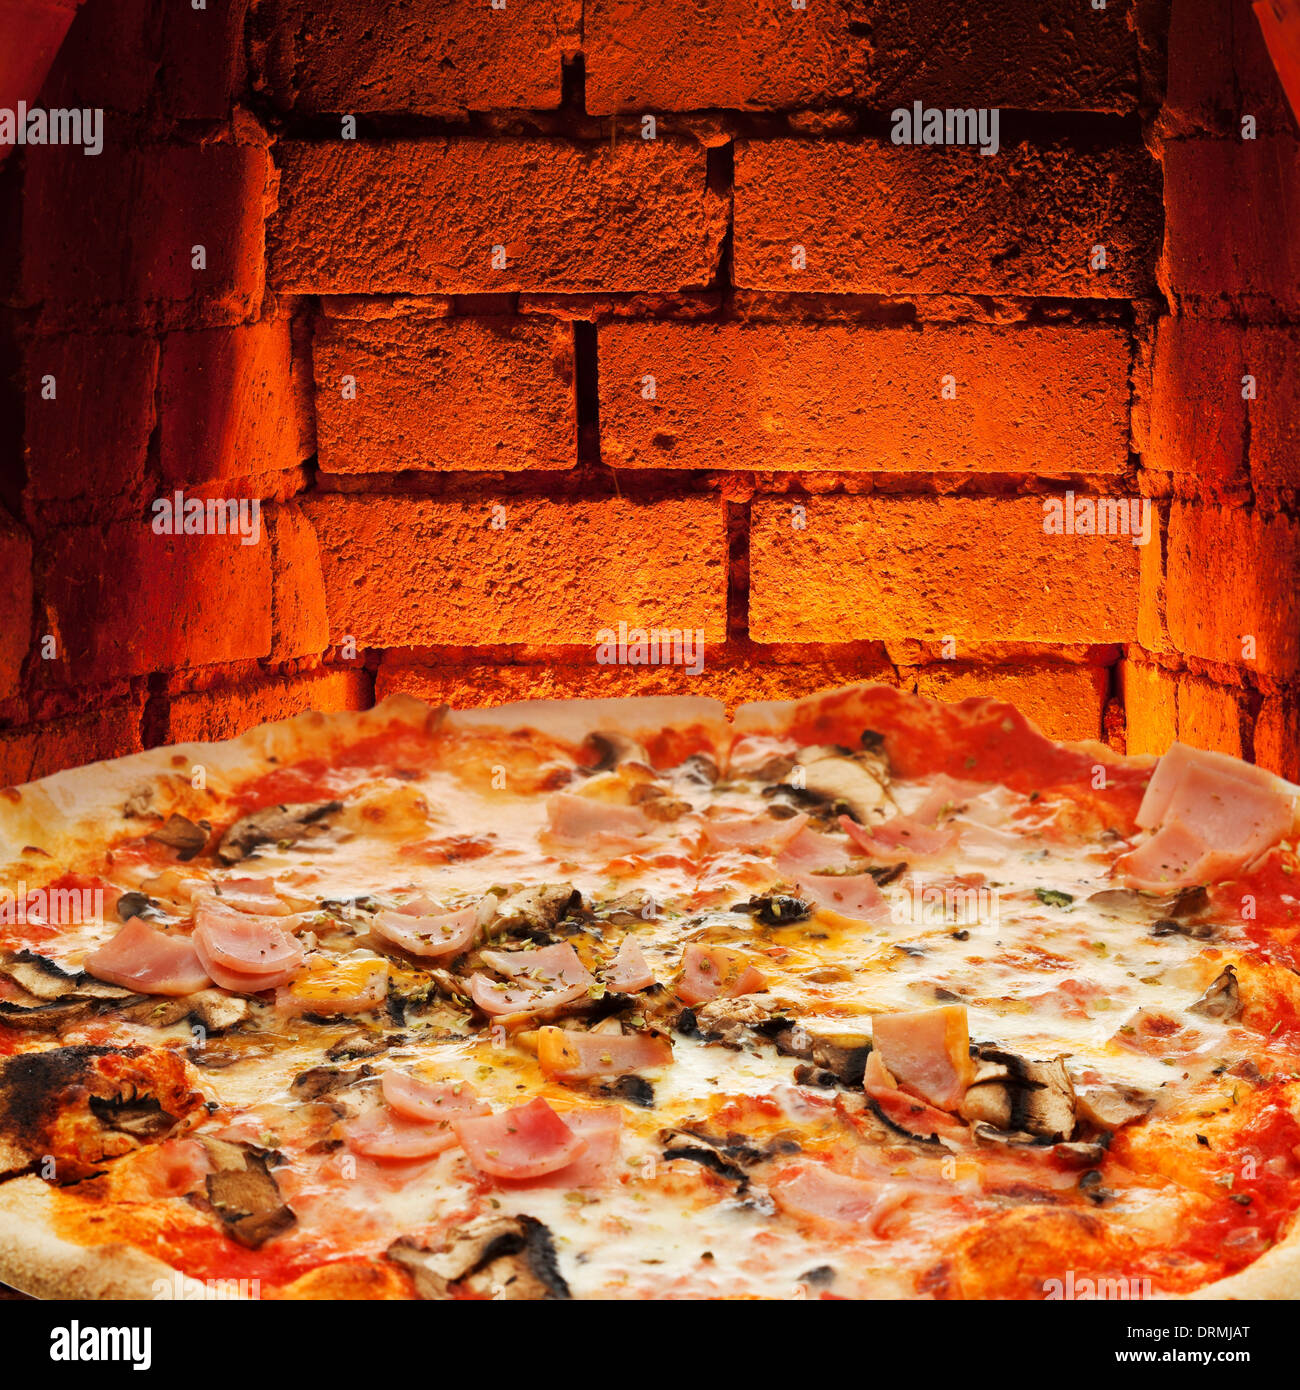 italian pizza with ham and mushrooms and hot brick wall of wood burning oven Stock Photo